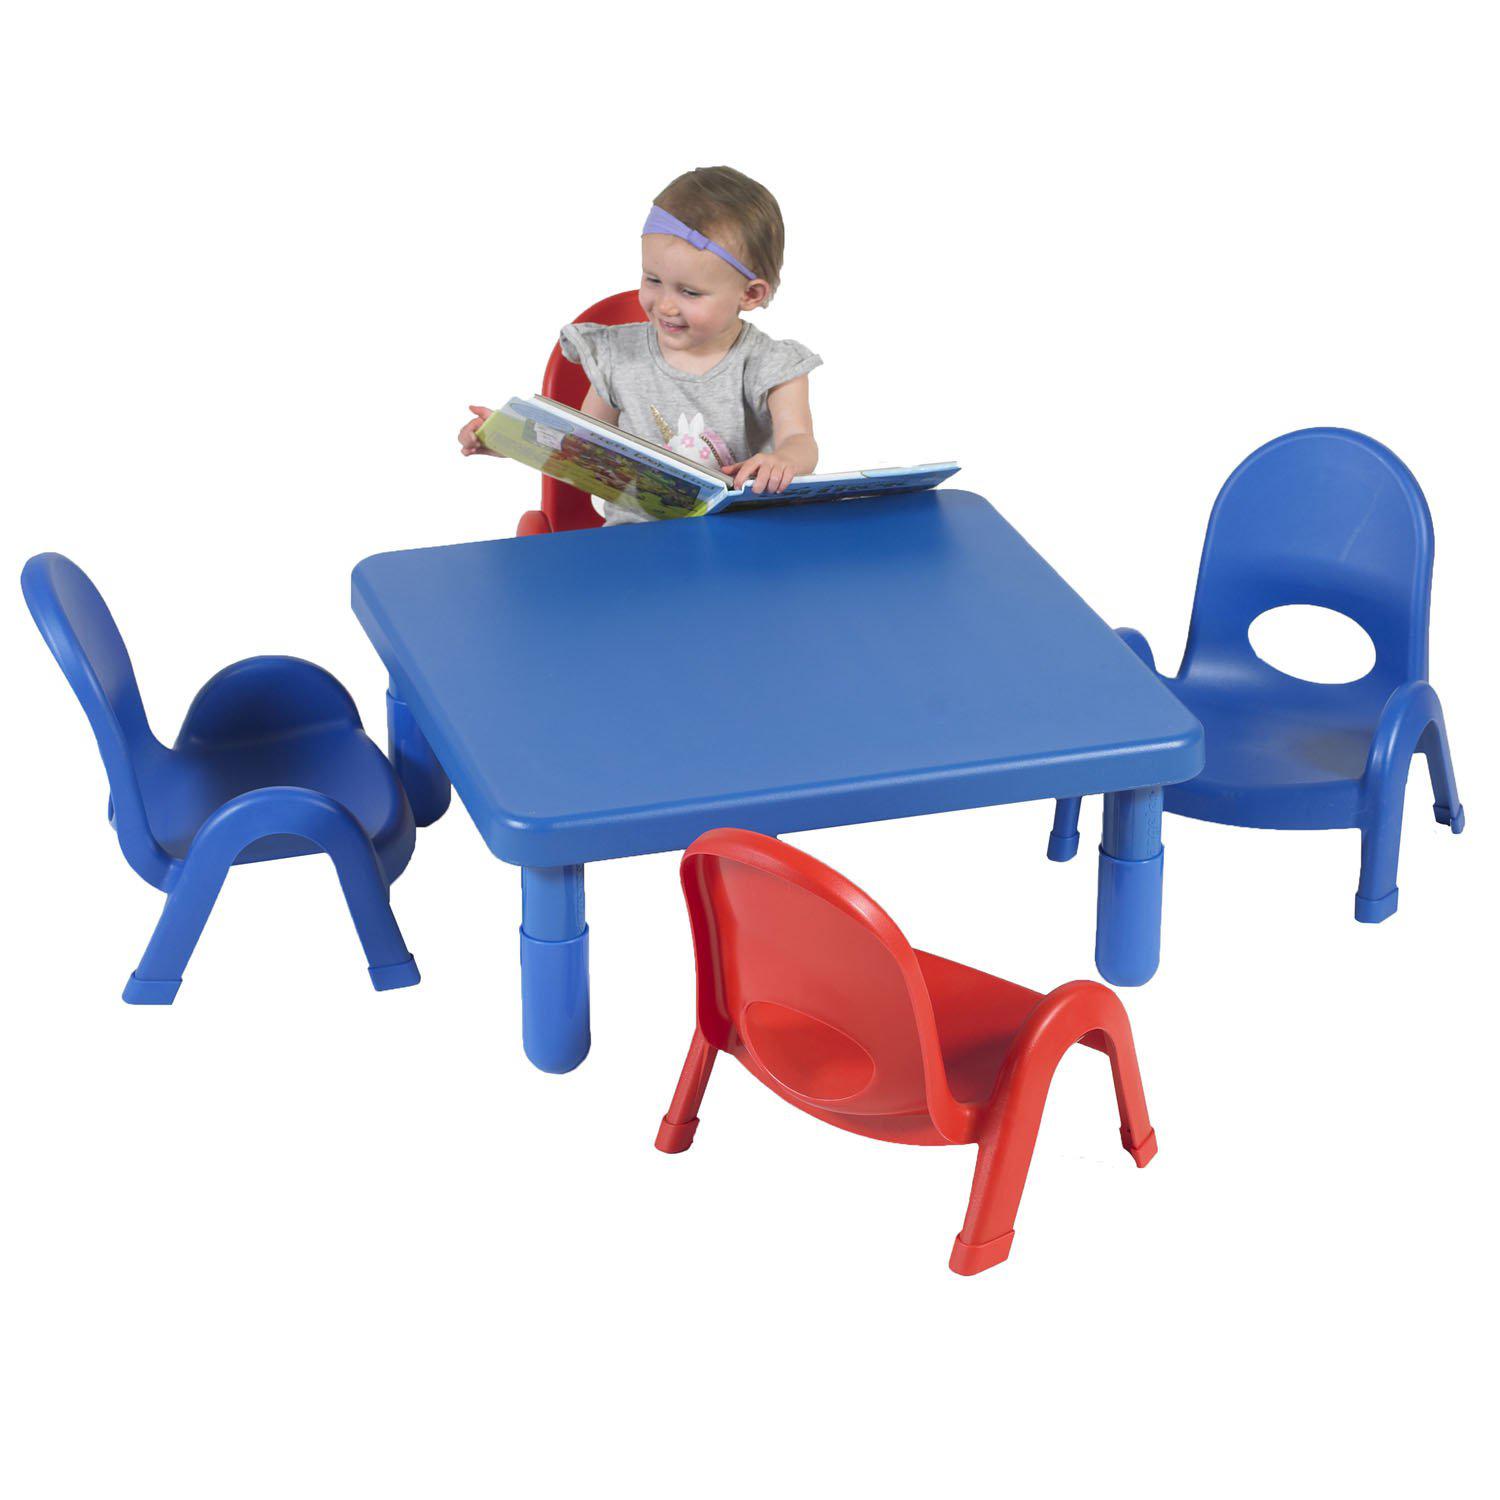 Toddler MyValue™ Table and Chair Set - 28" Square x 12"-High Royal Blue Table with 2 Royal Blue and 2 Candy Apple Red 5"-High Chairs